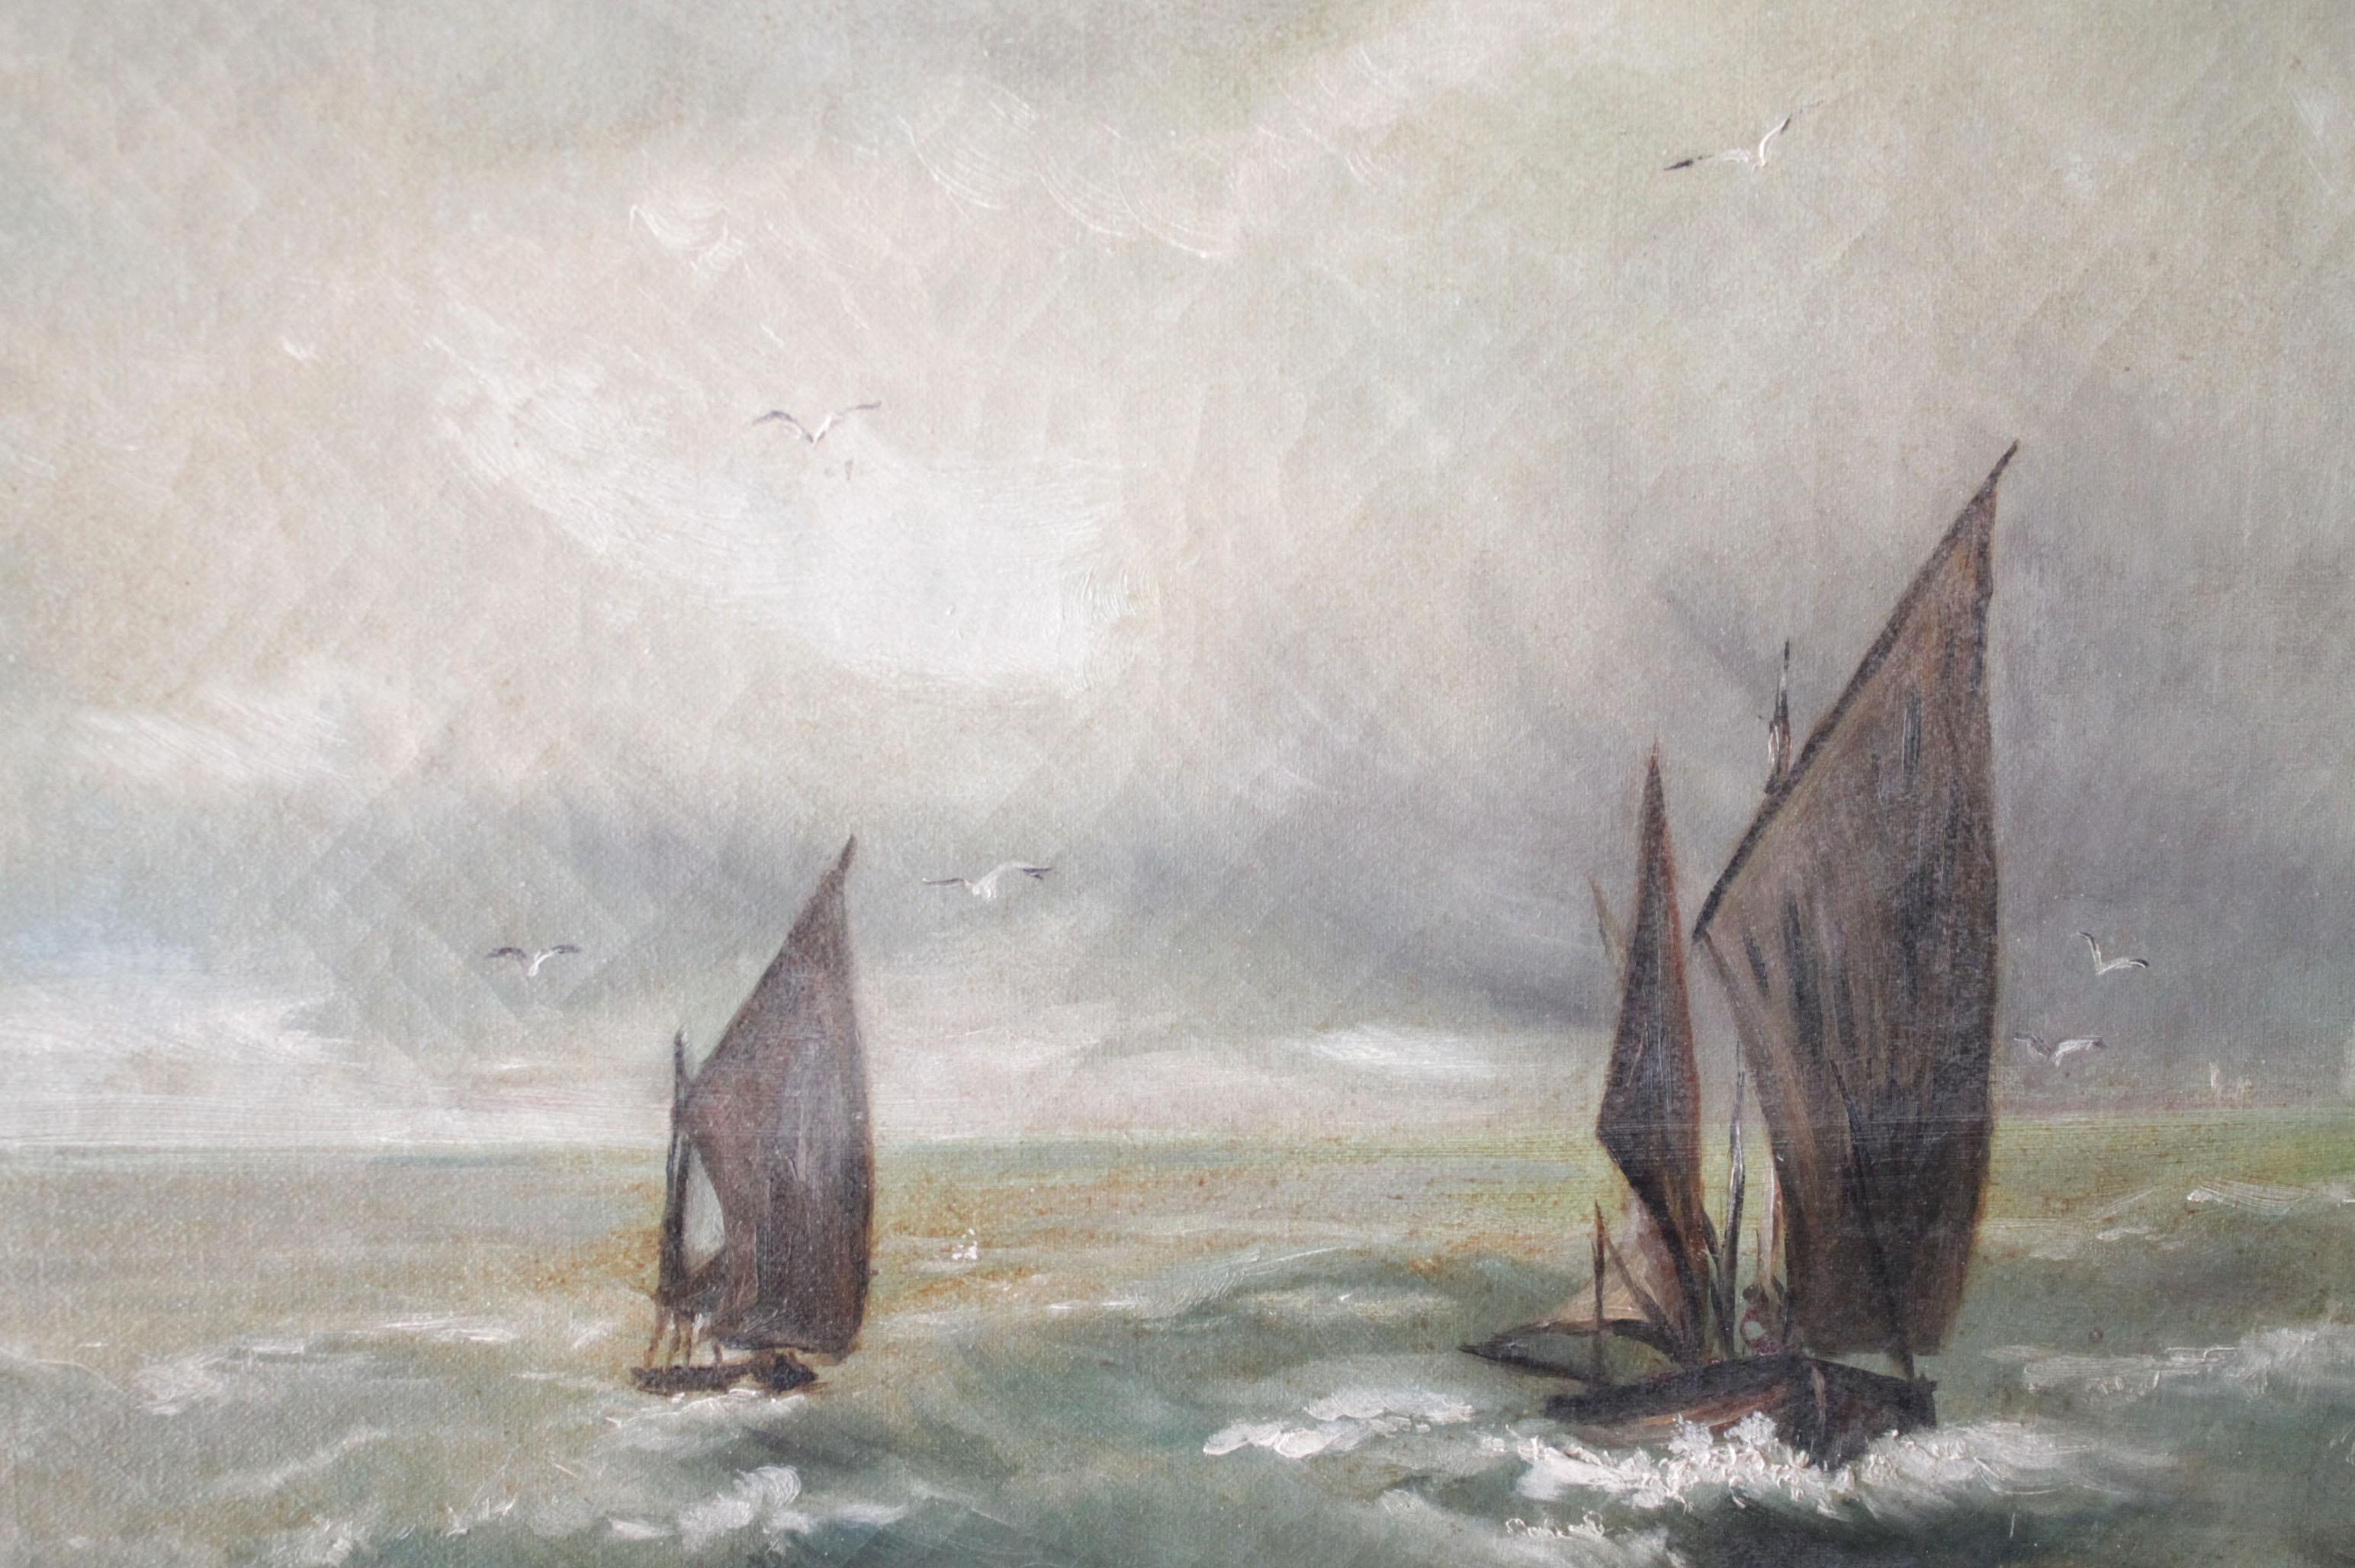 painting of a boat at sea